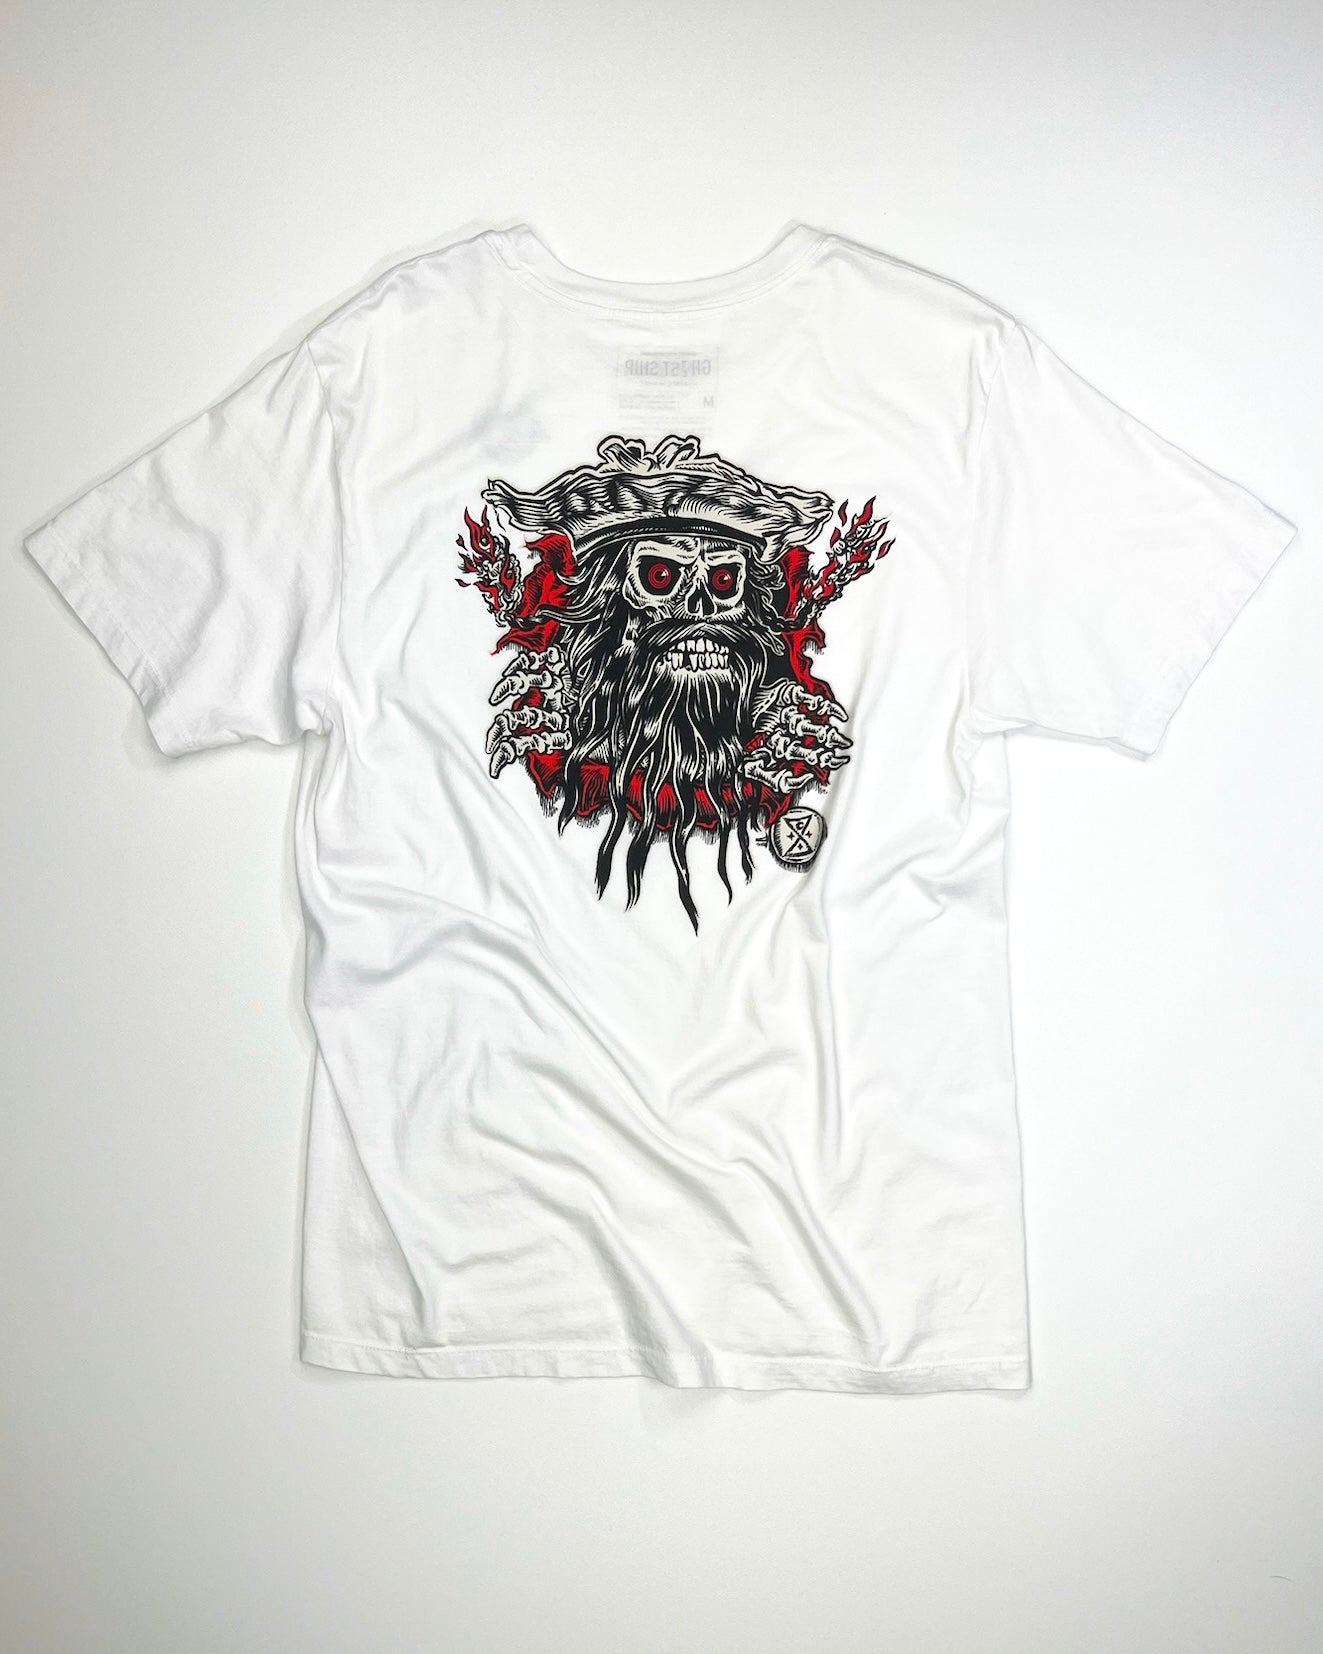 The Ripper White Tee - GHOSTSHIP.Supply